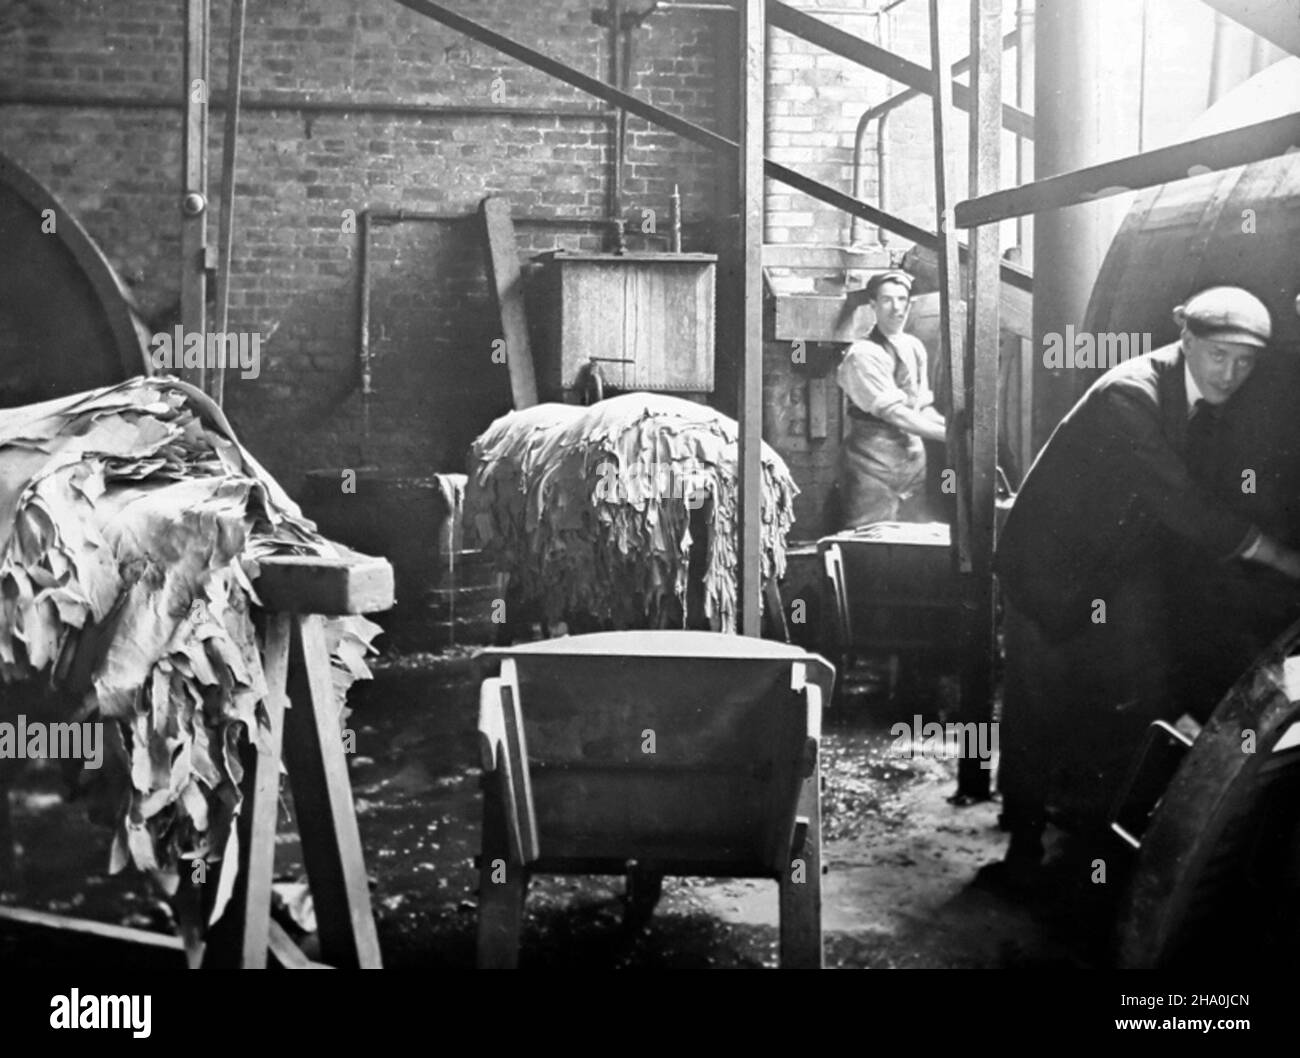 Sammiering skins, leather production, Victorian period Stock Photo